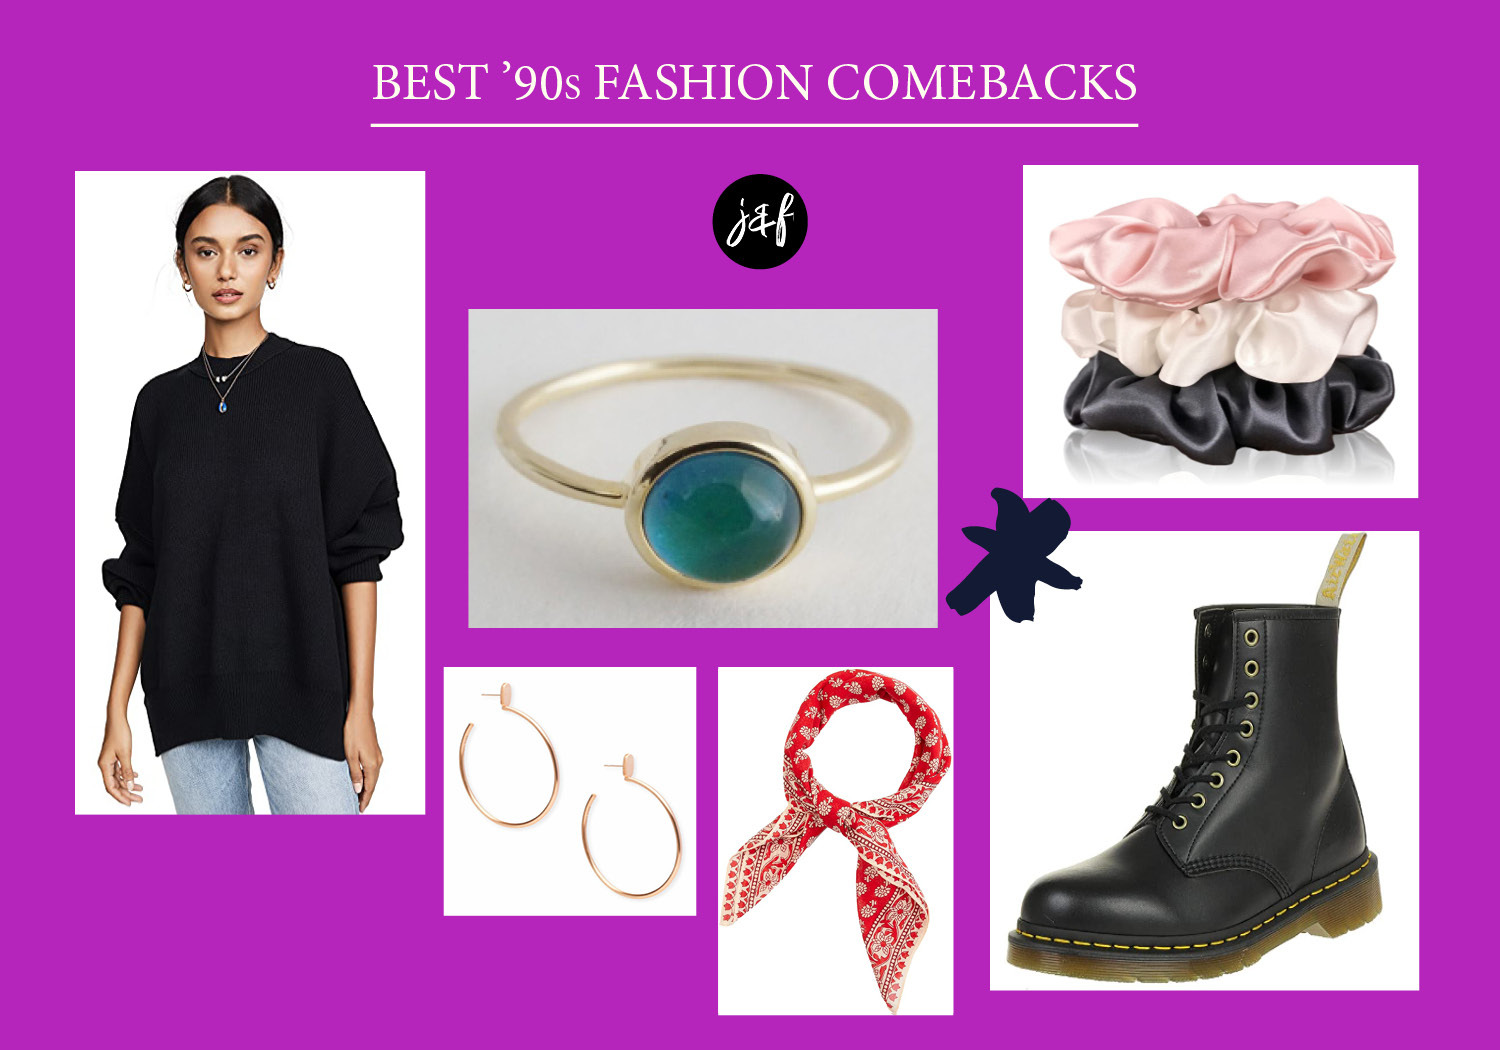 A bright violet graphic with the words "Best '90s fashion comebacks" and a collage with an oversized sweater, mood ring, scrunchies, hoop earrings, bandana, and fashion combat boot.